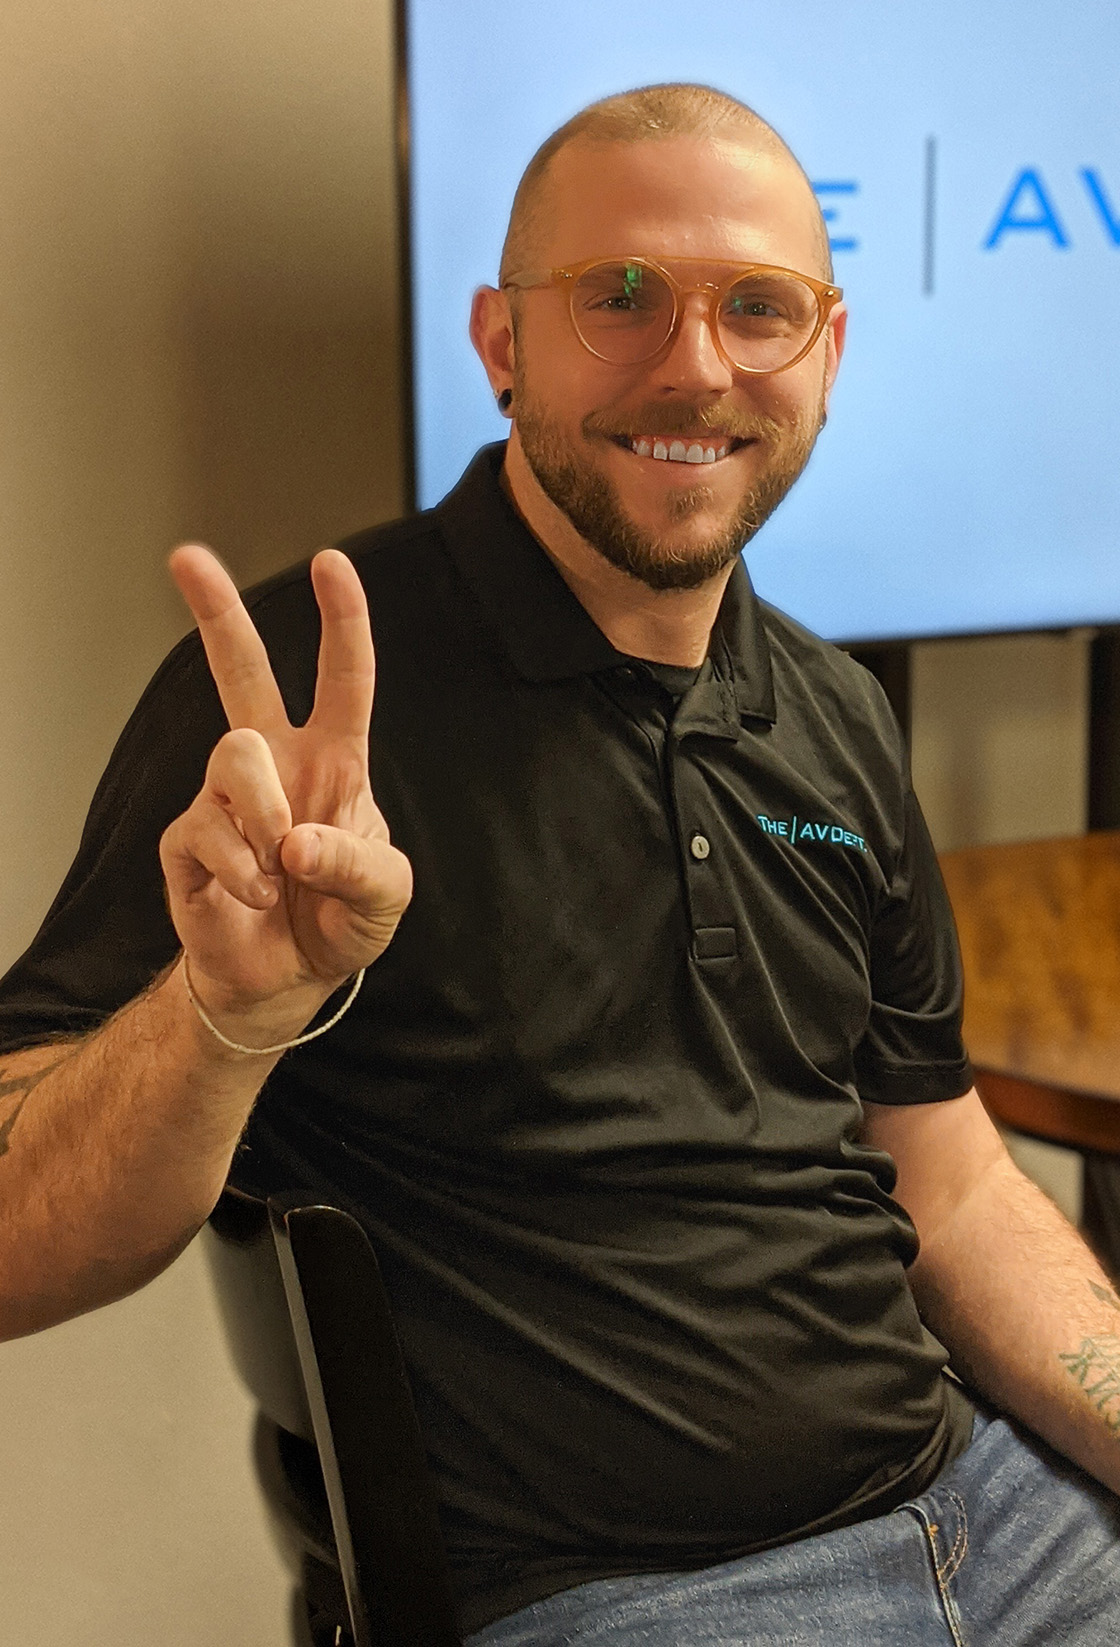 Devin Eaton, The AV Department Technical Events Planner hold up two fingers in a peace sign. He is sitting at a table in front of a large monitor that displays The AV Department logo